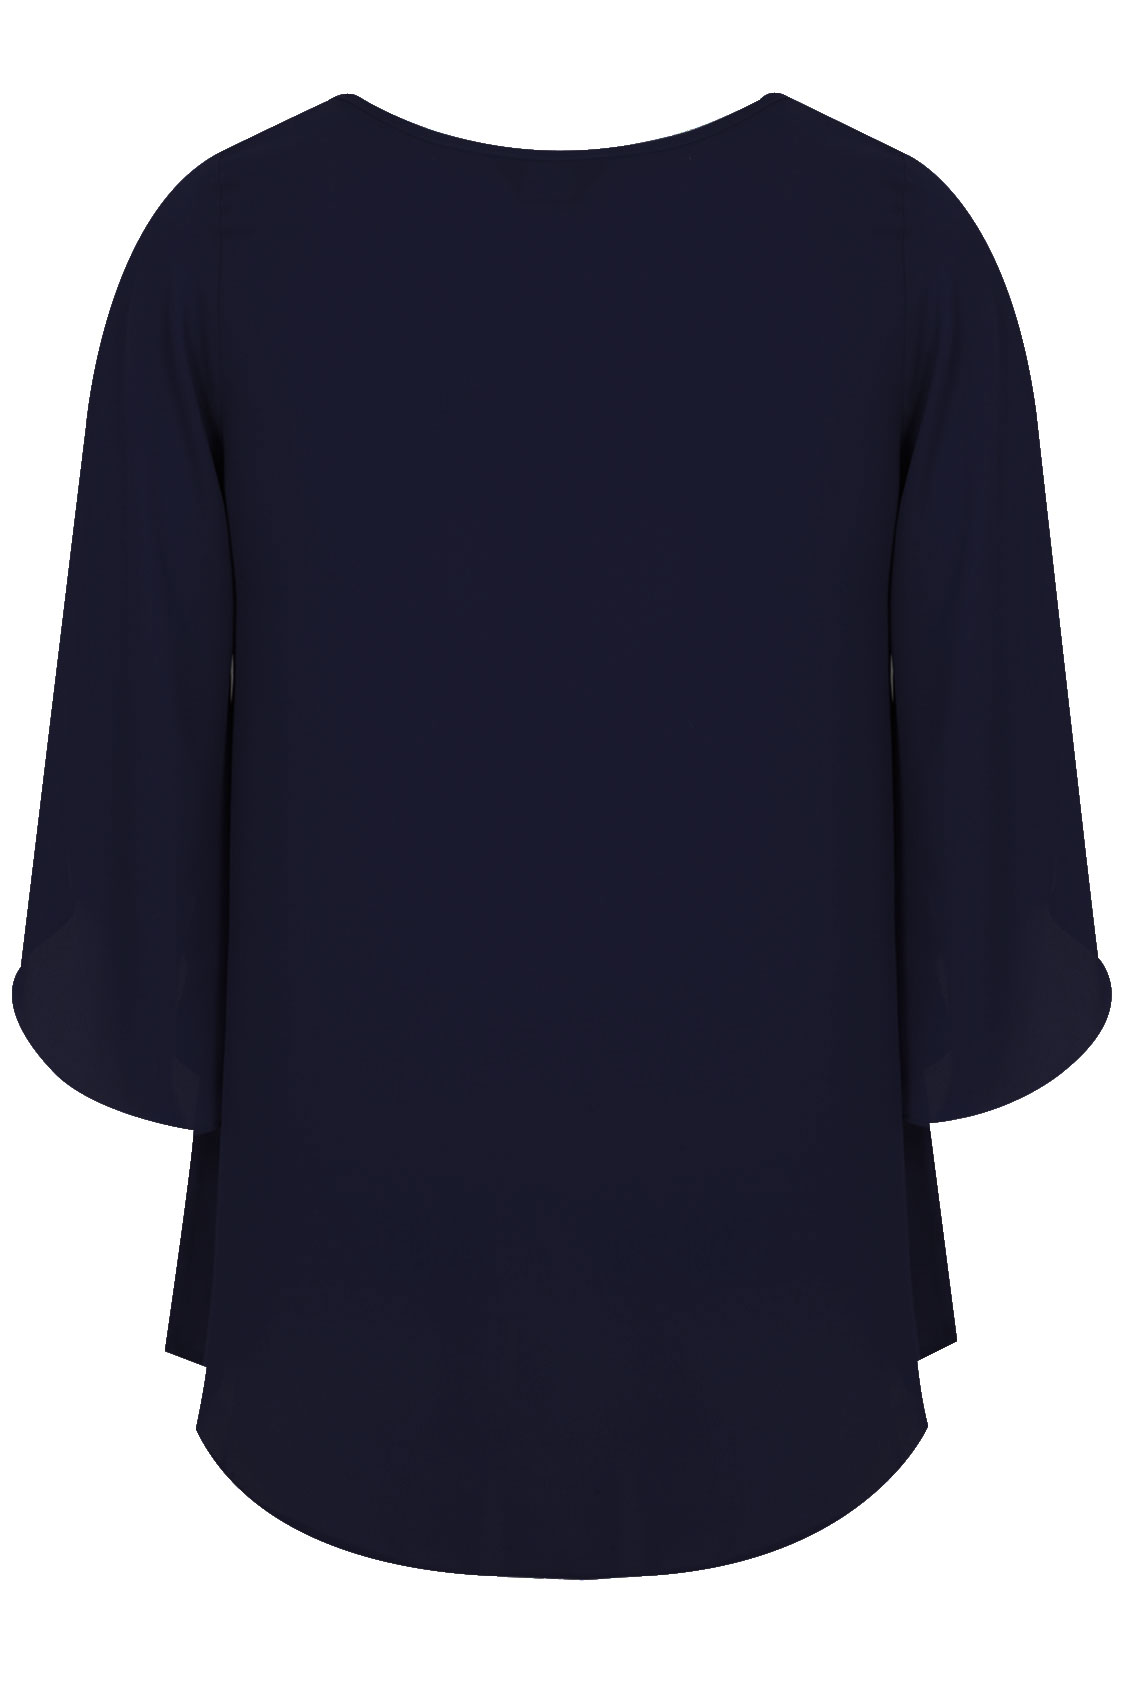 Navy Chiffon Blouse With Split Angel Sleeves Plus size 16,18,20,22,24 ...